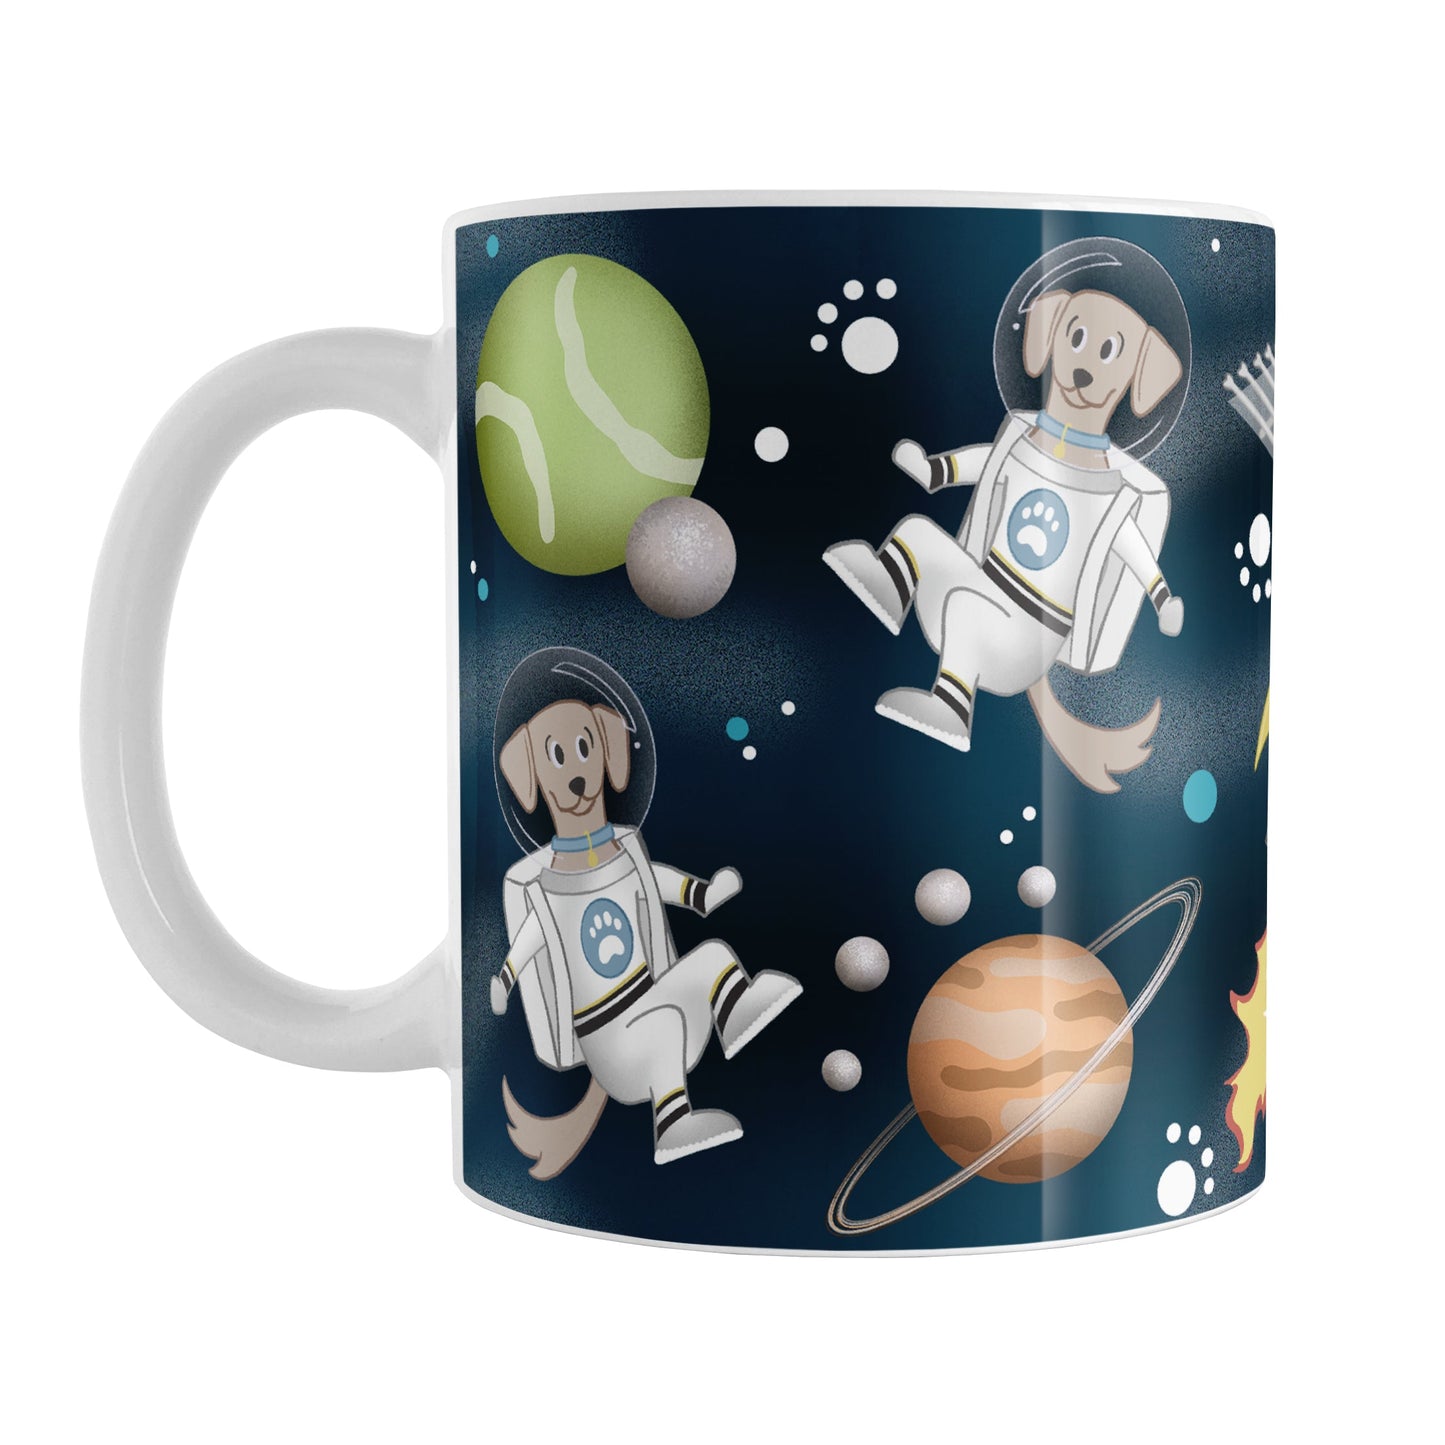 Galaxy Dog-stronaut Mug (11oz) at Amy's Coffee Mugs. A ceramic coffee mug with a fun galaxy "dog-stronaut" design with dog astronauts, dog themed planets, a dog bone satellite, paw print stars, and a dog branded rocket ship on an outer-space background. Perfect for people who love galaxy and space designs, and love dogs too!